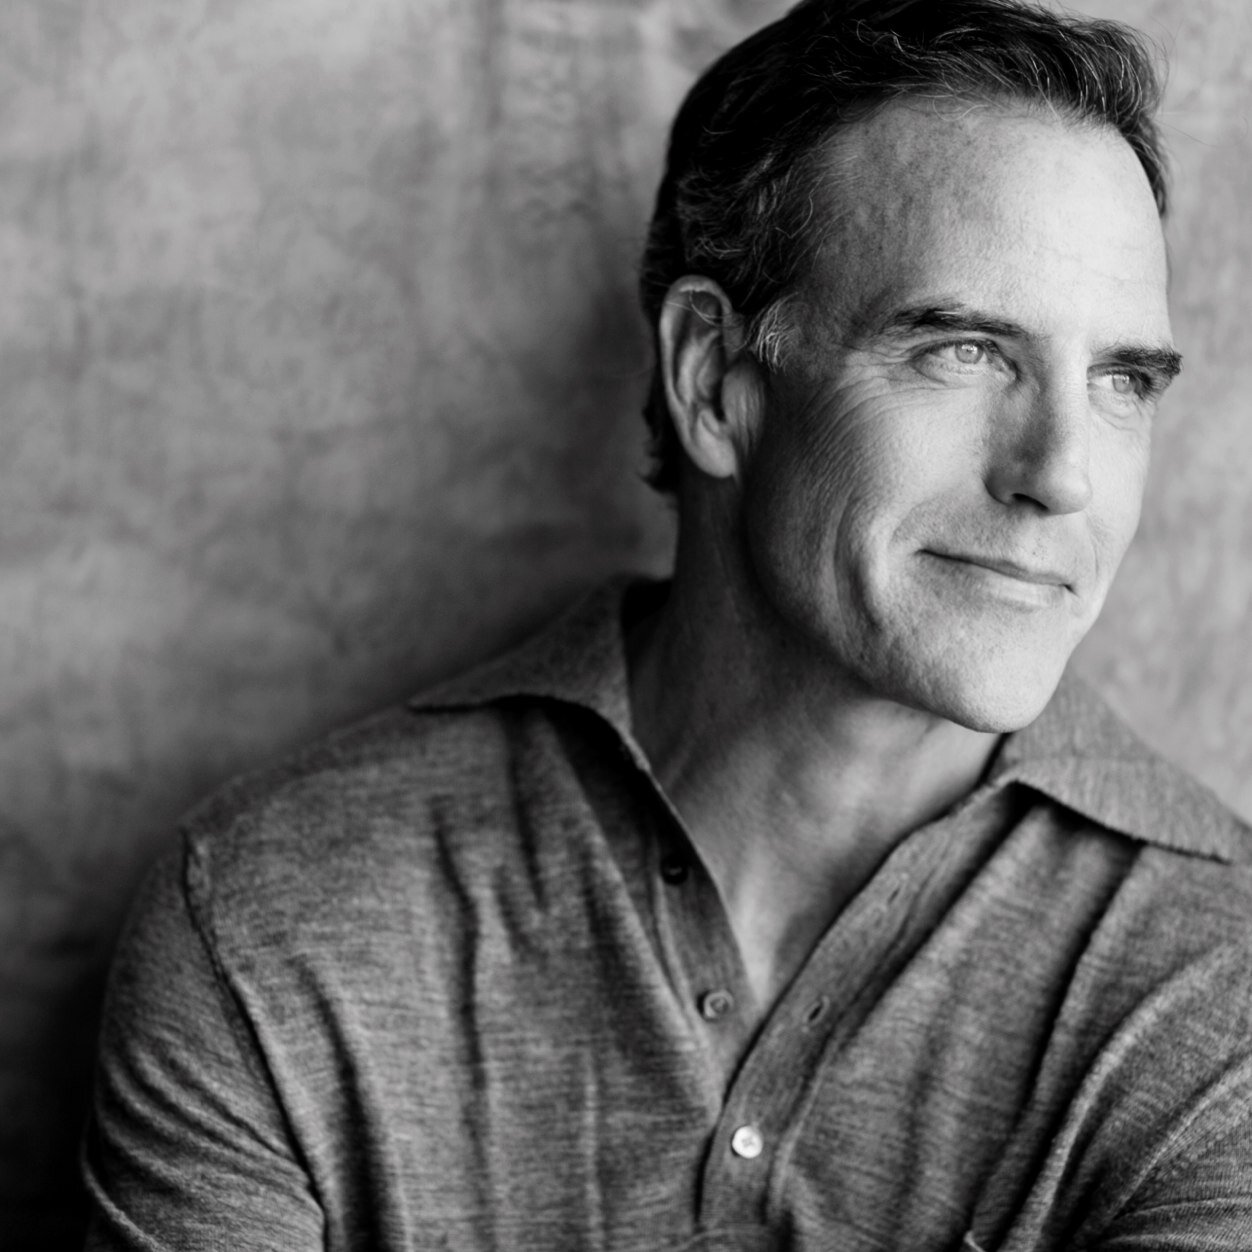 The Sentinel, Hostel 2, In Her Shoes, Desperate Housewives, 24, Seinfeld, General Hospital and best job of all fatherhood! #RealRB On insta I am Richard Burgi